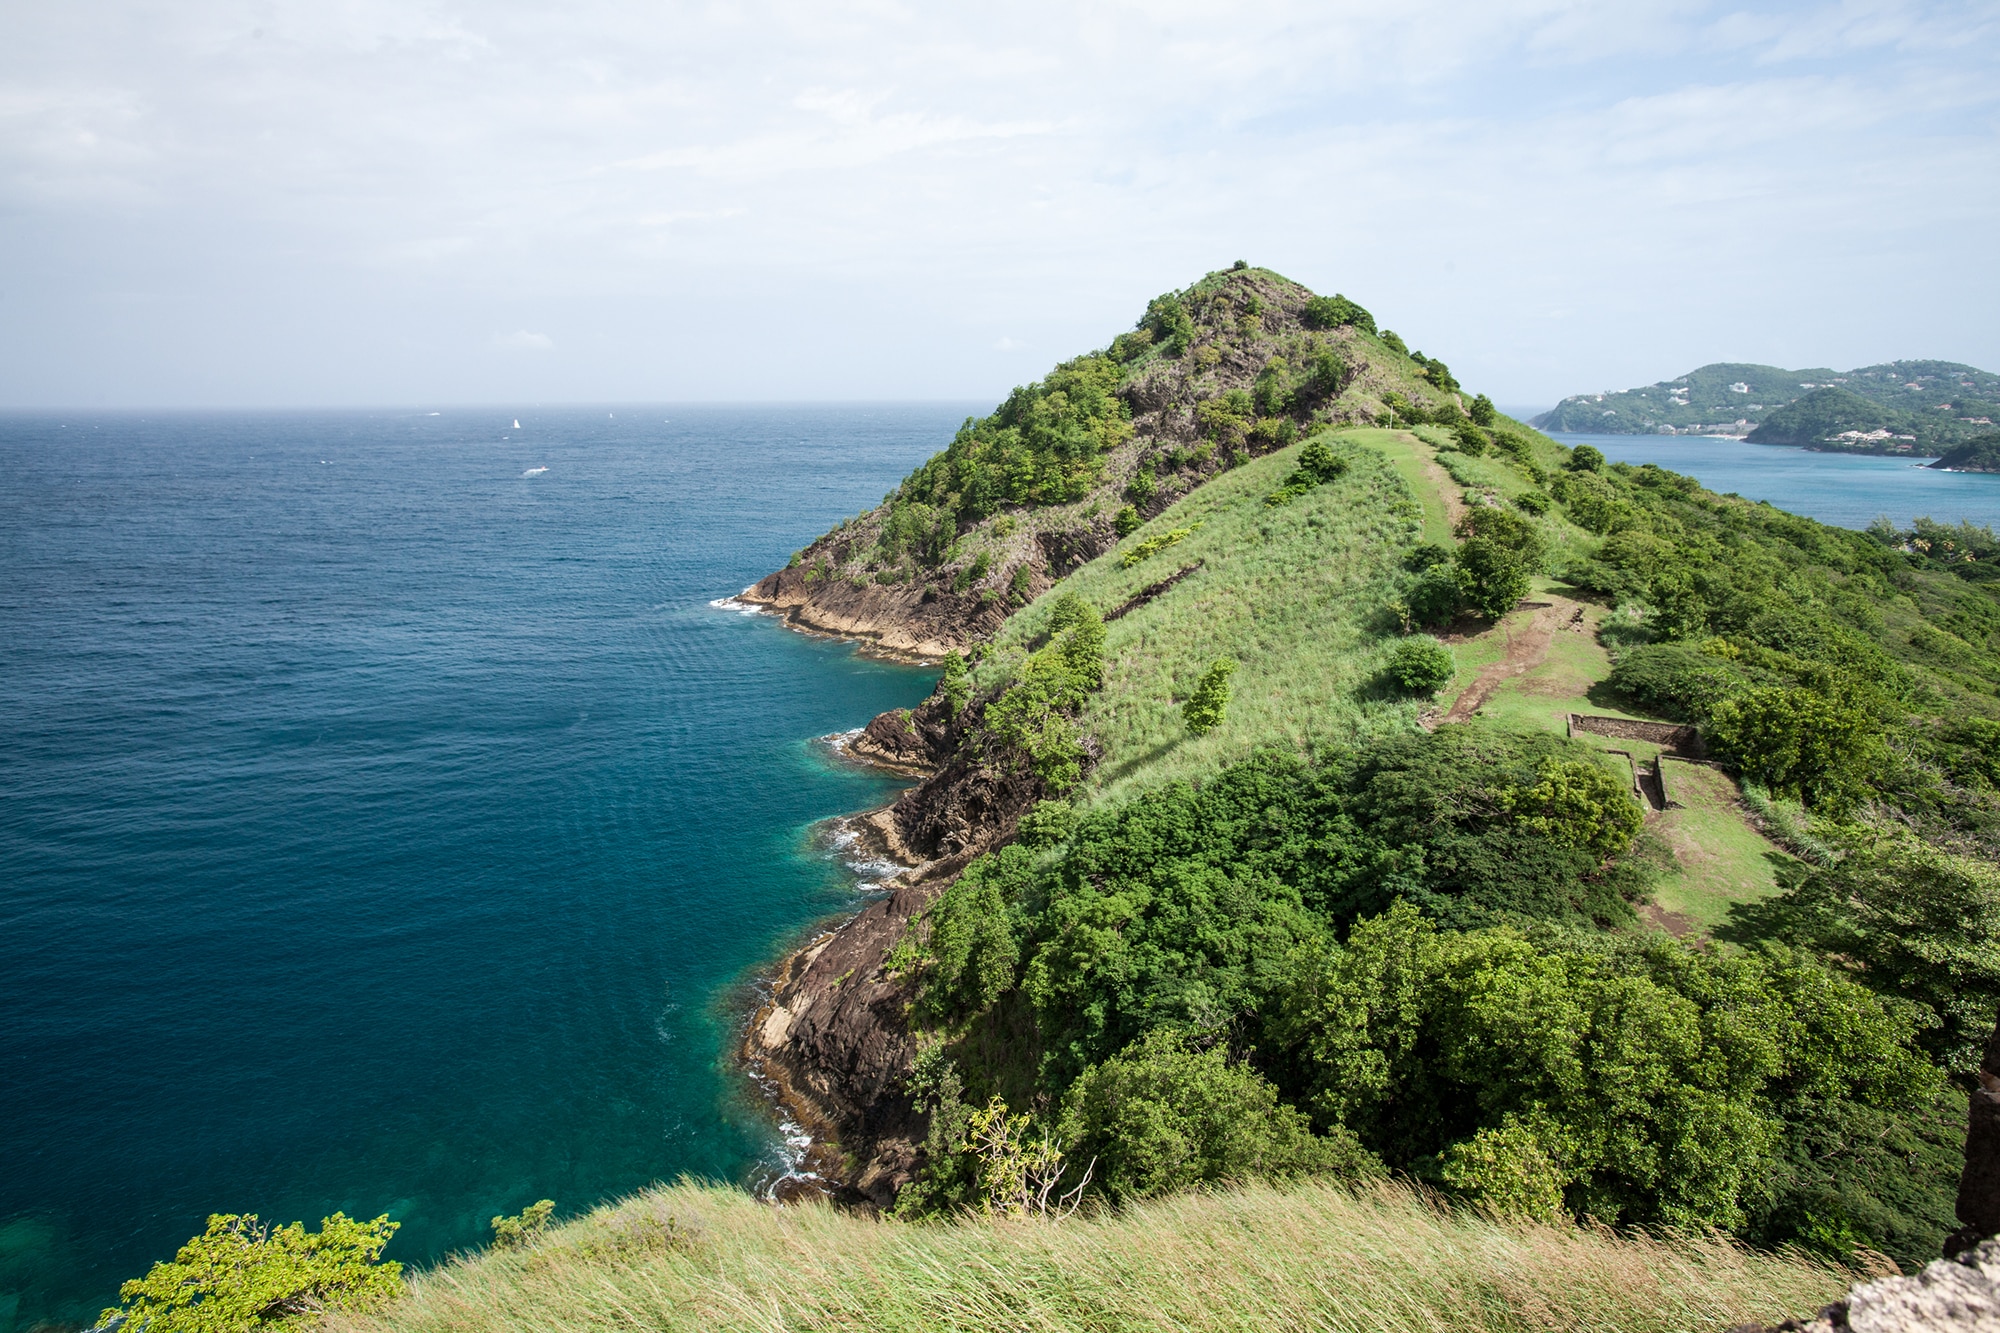 St. Lucia Resorts | Things to Do in St. Lucia: Pigeon Island National Landmark